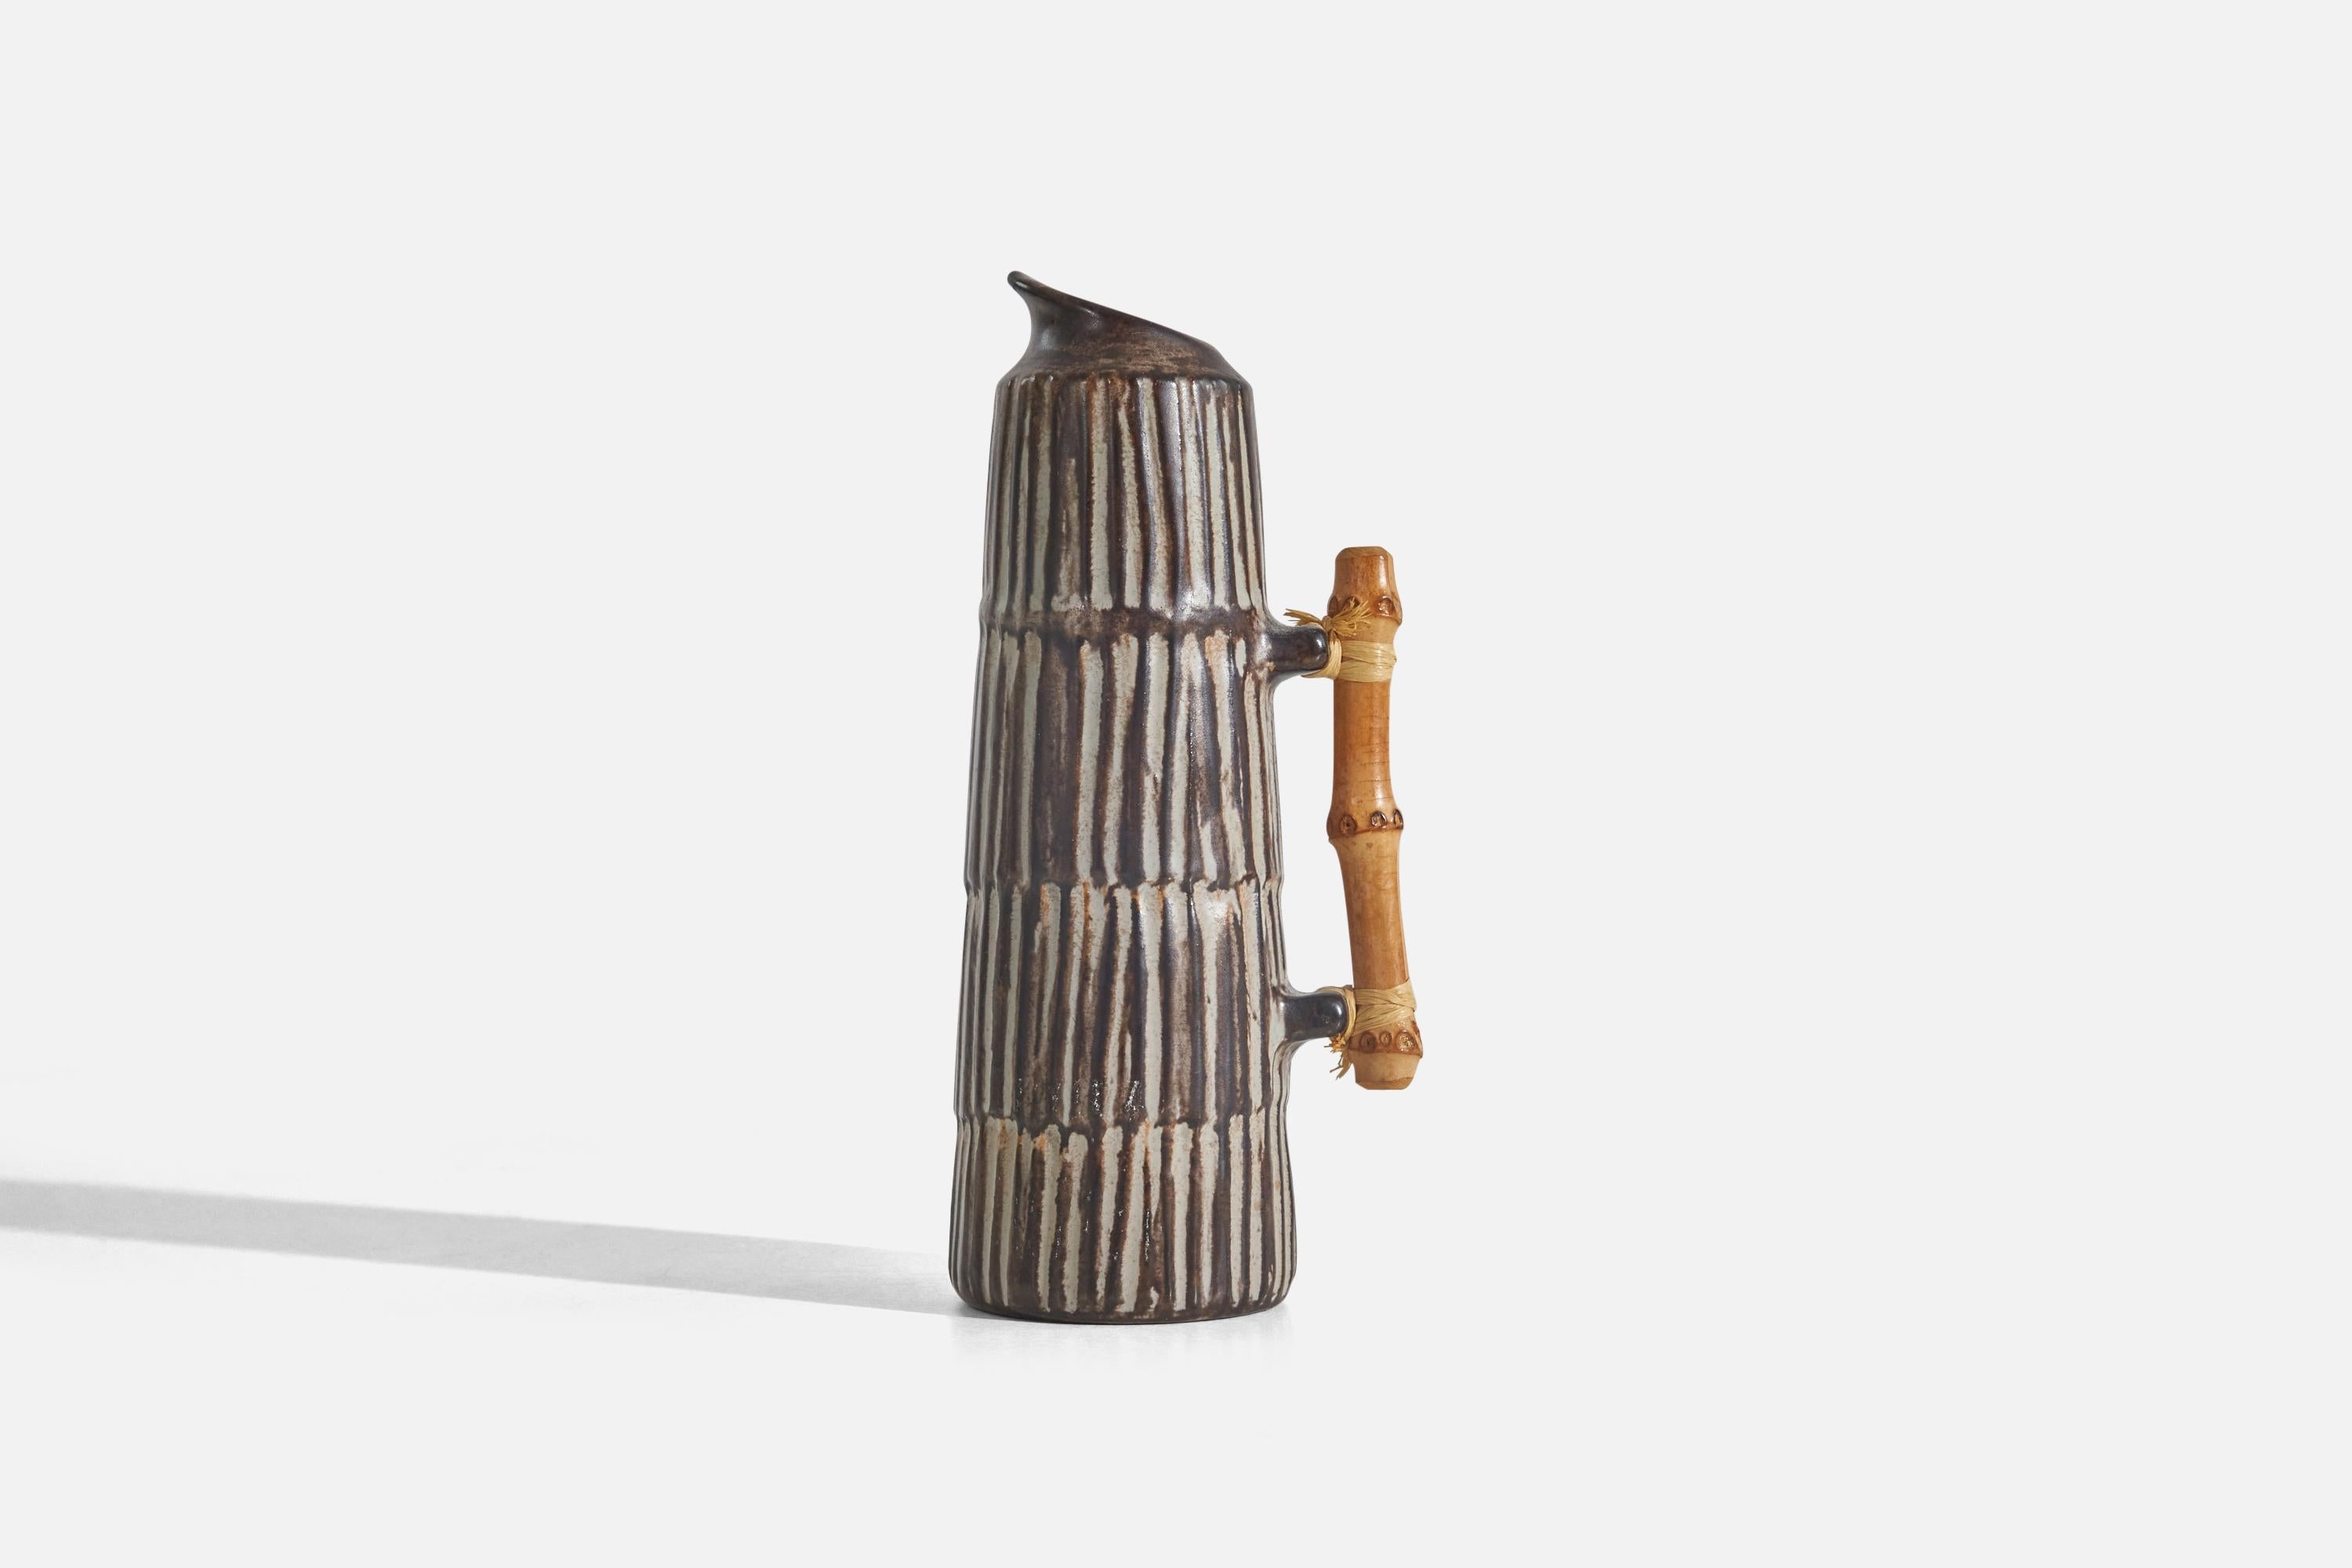 A brown and white-glazed stoneware and bamboo pitcher designed by Einer Hellerøe and produced by BR Keramik, Denmark, c. 1960s.